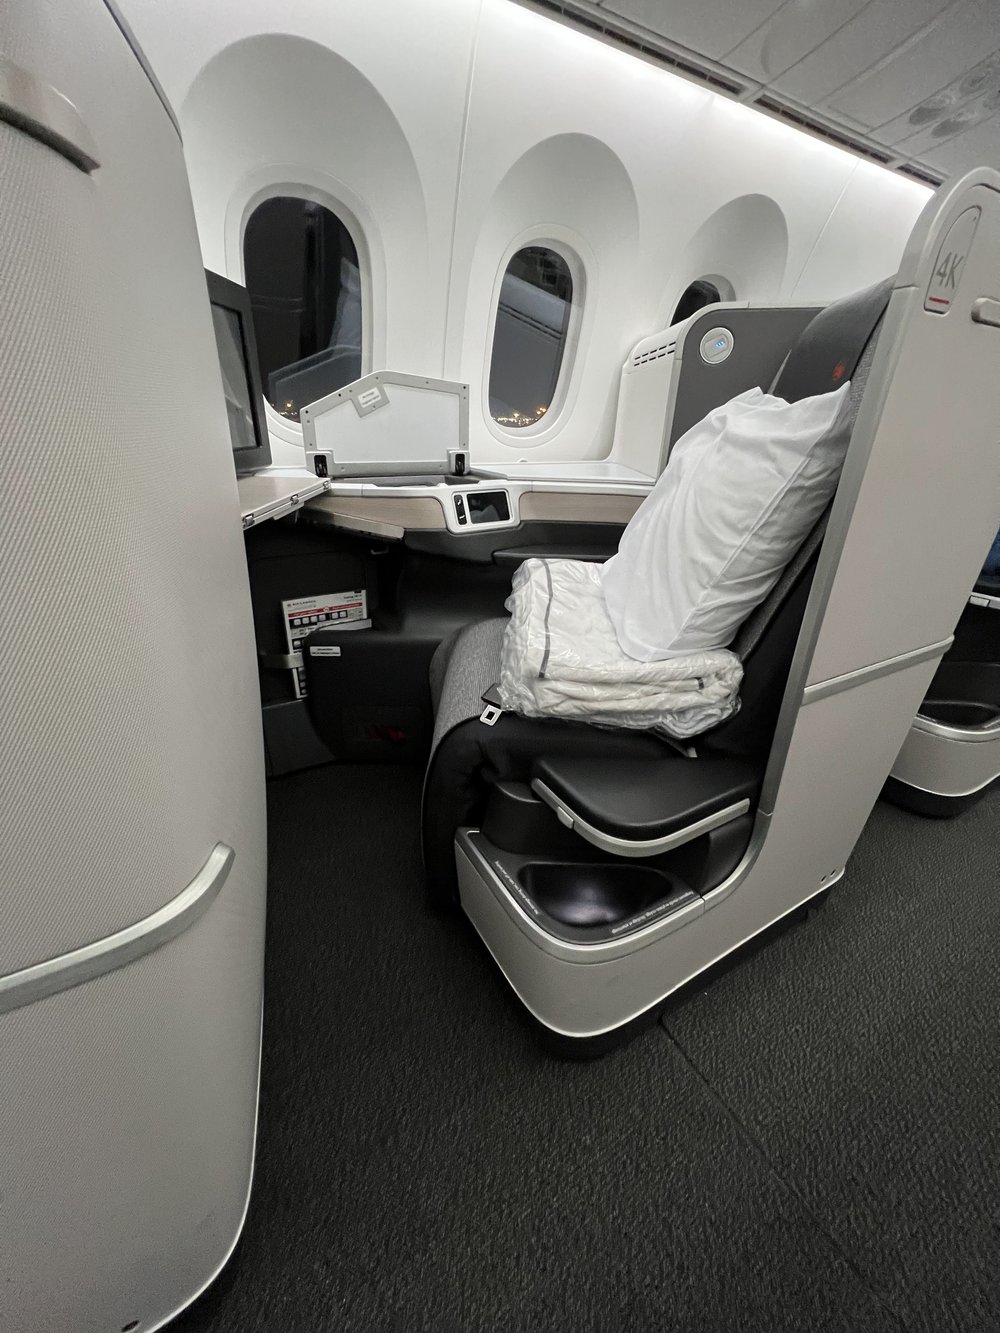 4. In-Flight Services and Amenities